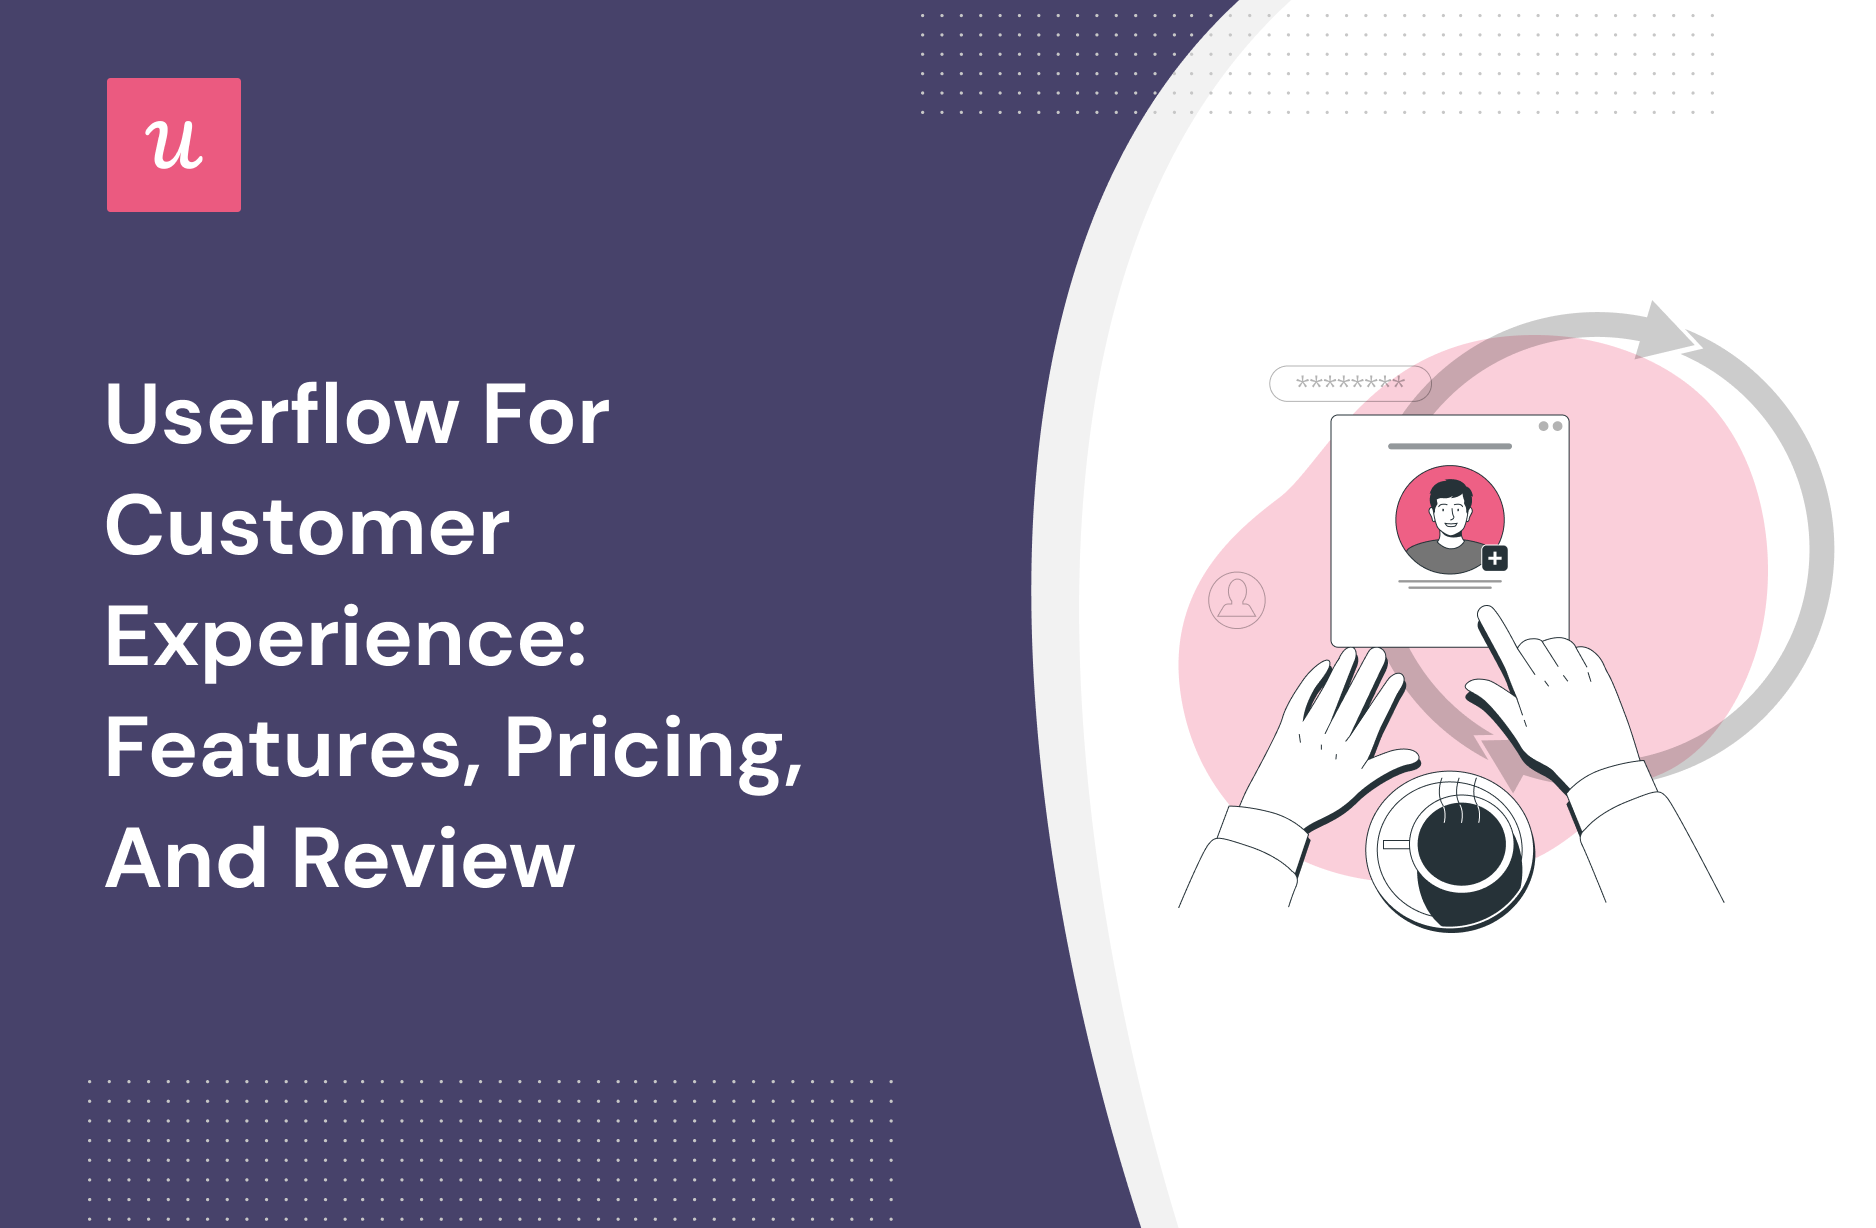 Userflow for Customer Experience: Features, Pricing, and Review